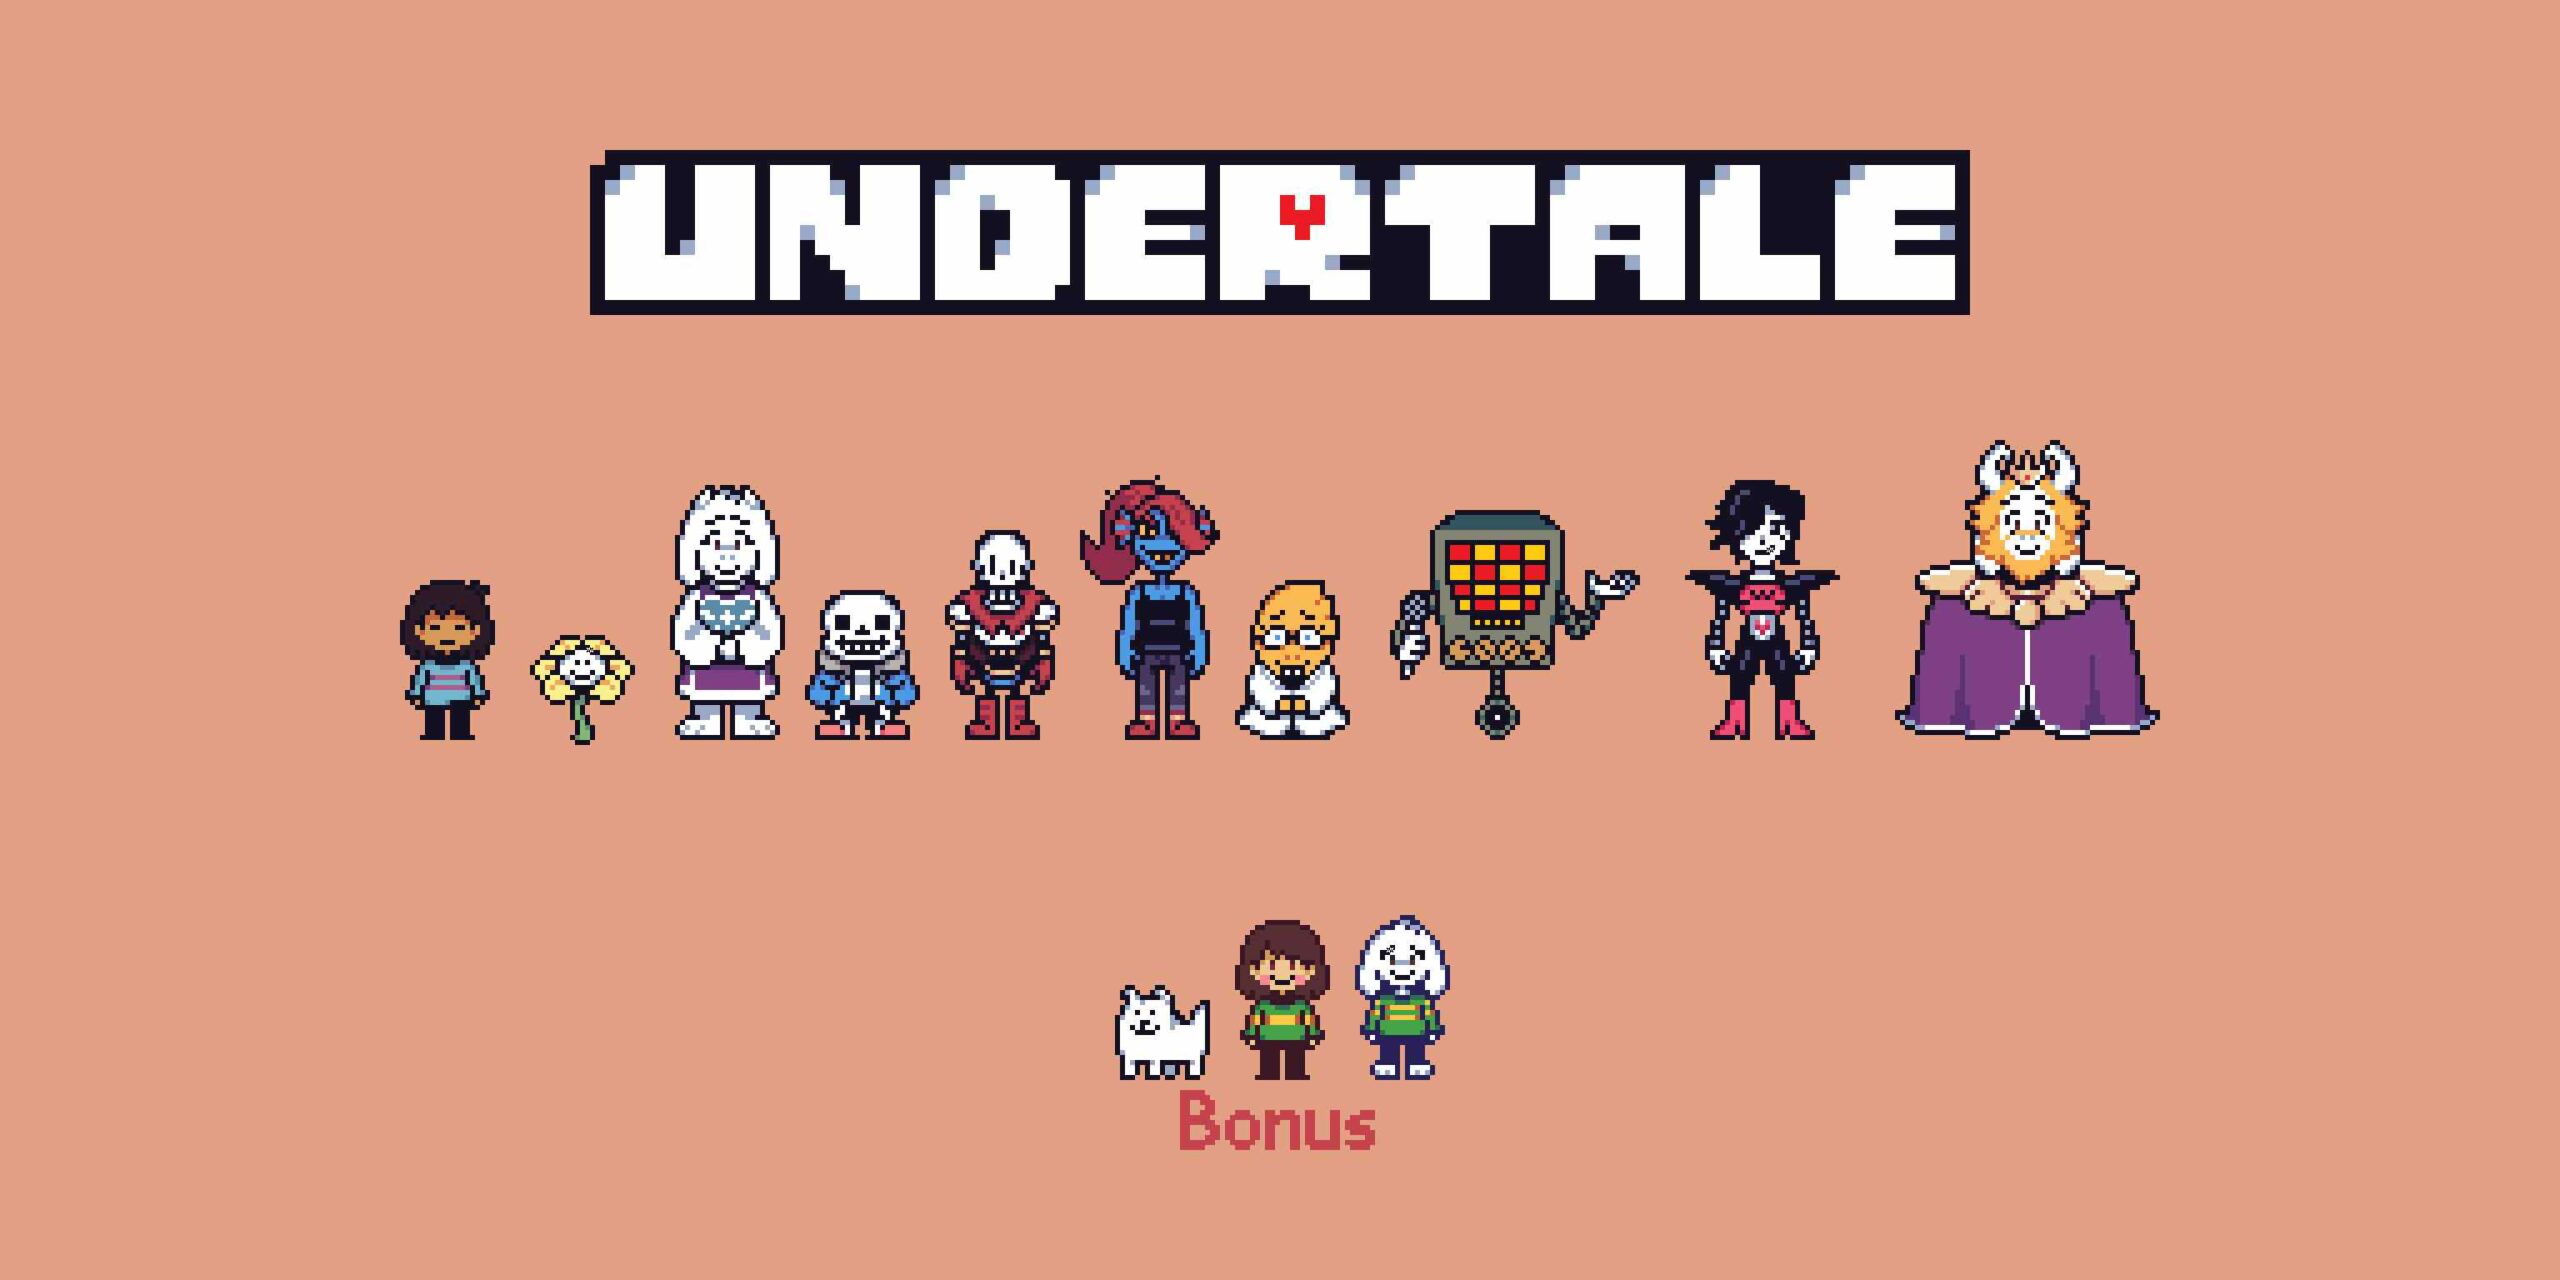 Undertale is a role-playing game by Toby Fox that came out in 2015.